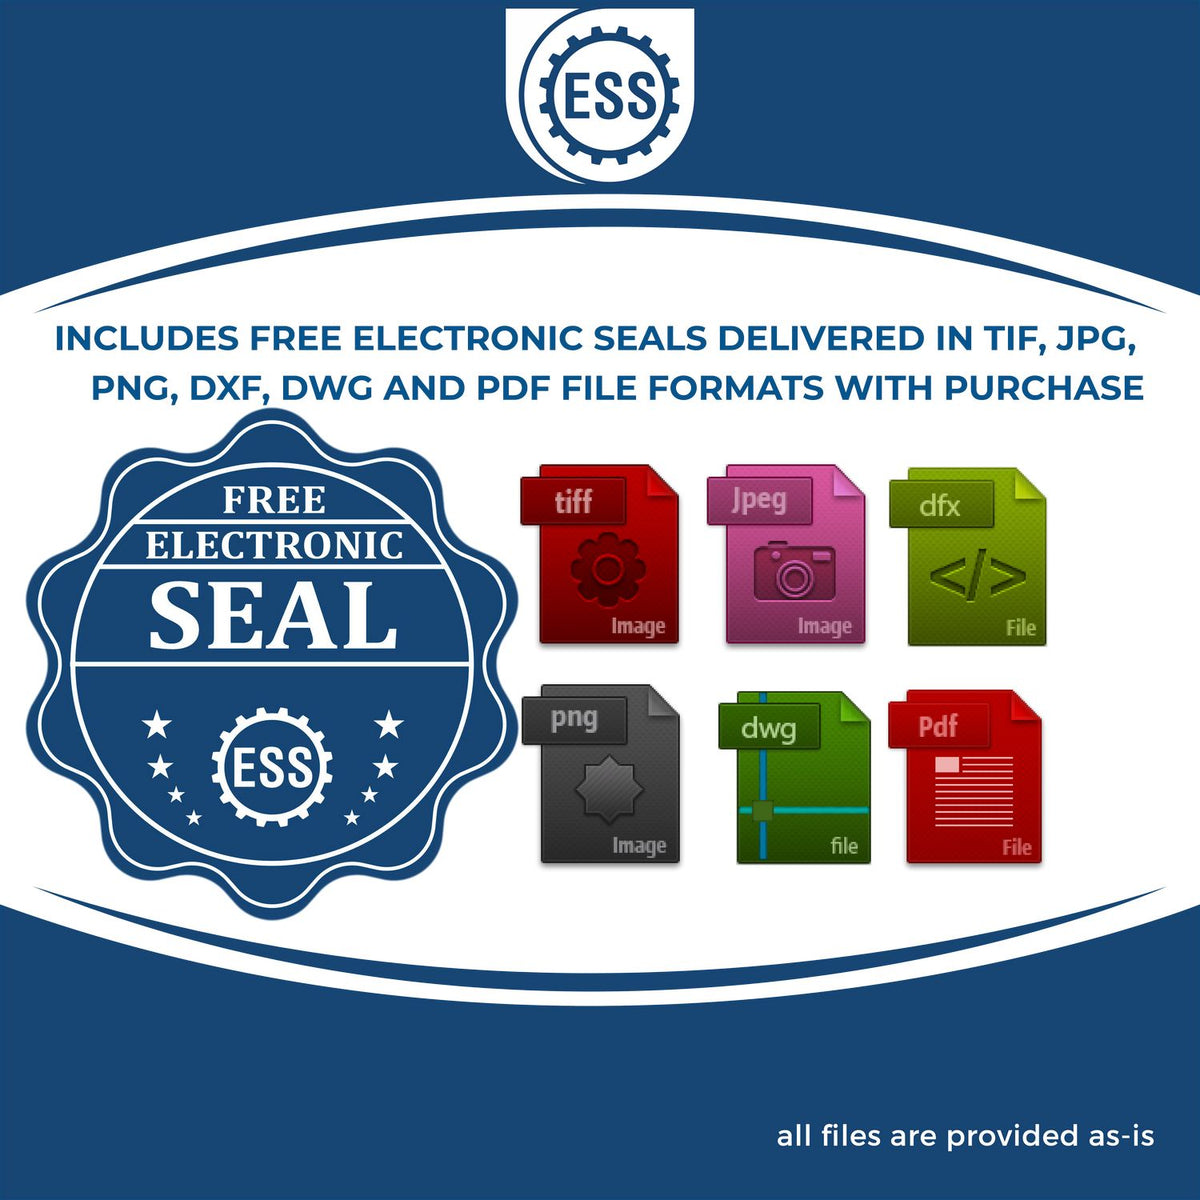 An infographic for the free electronic seal for the Handheld Oklahoma Professional Geologist Embosser illustrating the different file type icons such as DXF, DWG, TIF, JPG and PNG.